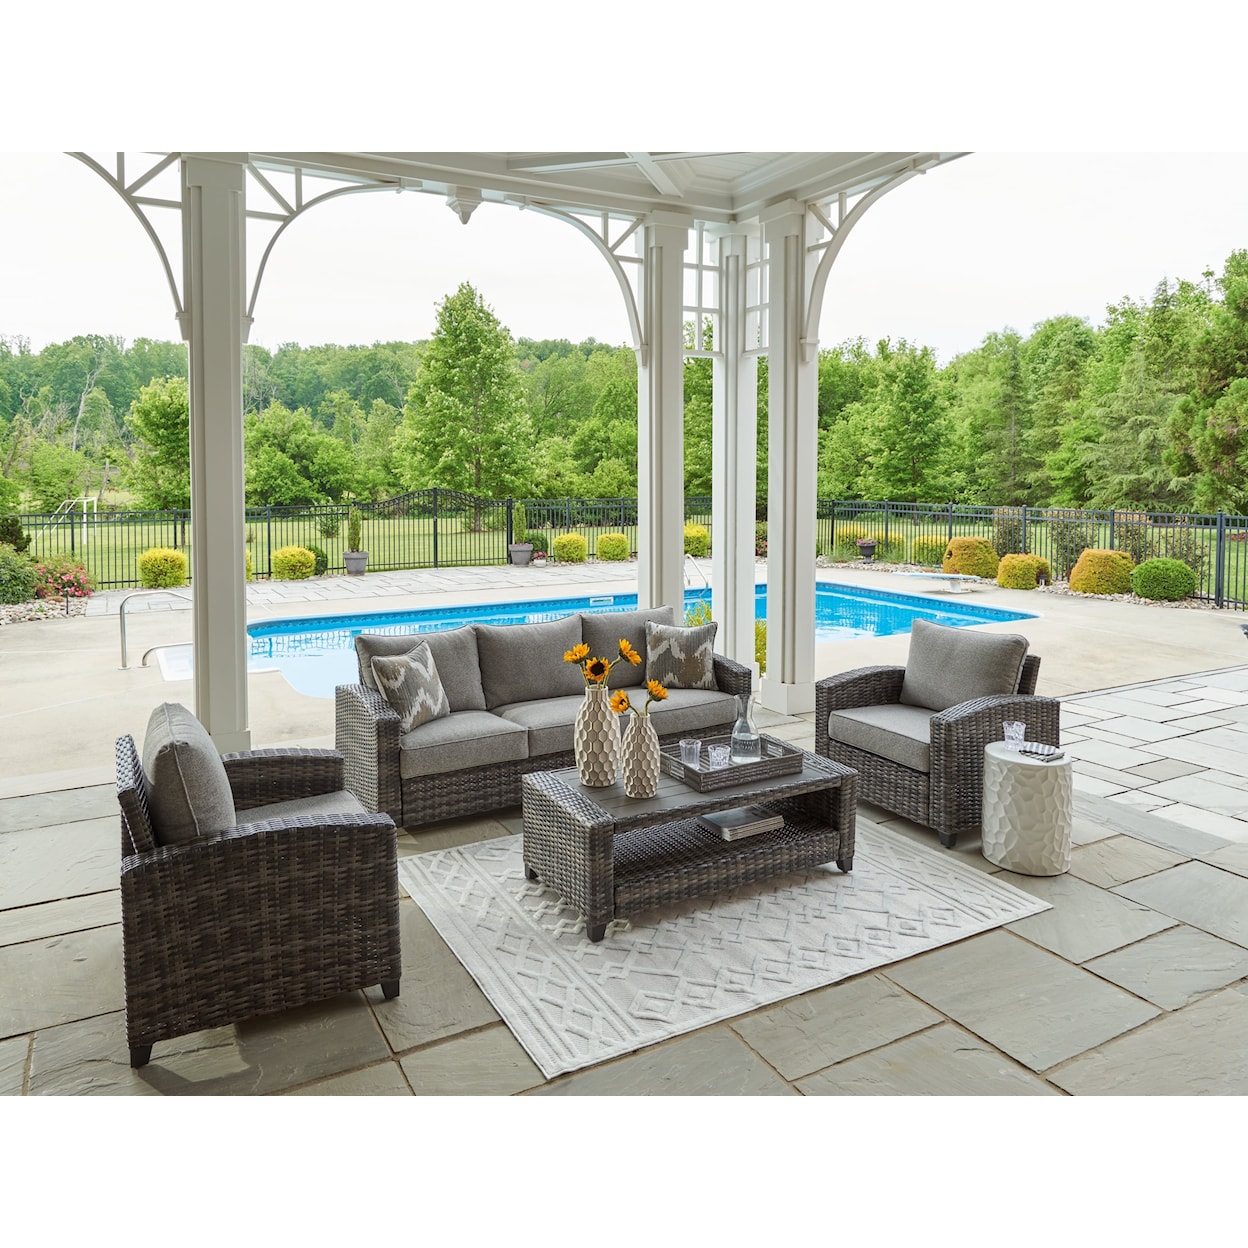 Signature Design by Ashley Oasis Court Outdoor Chat Set - 4 pc